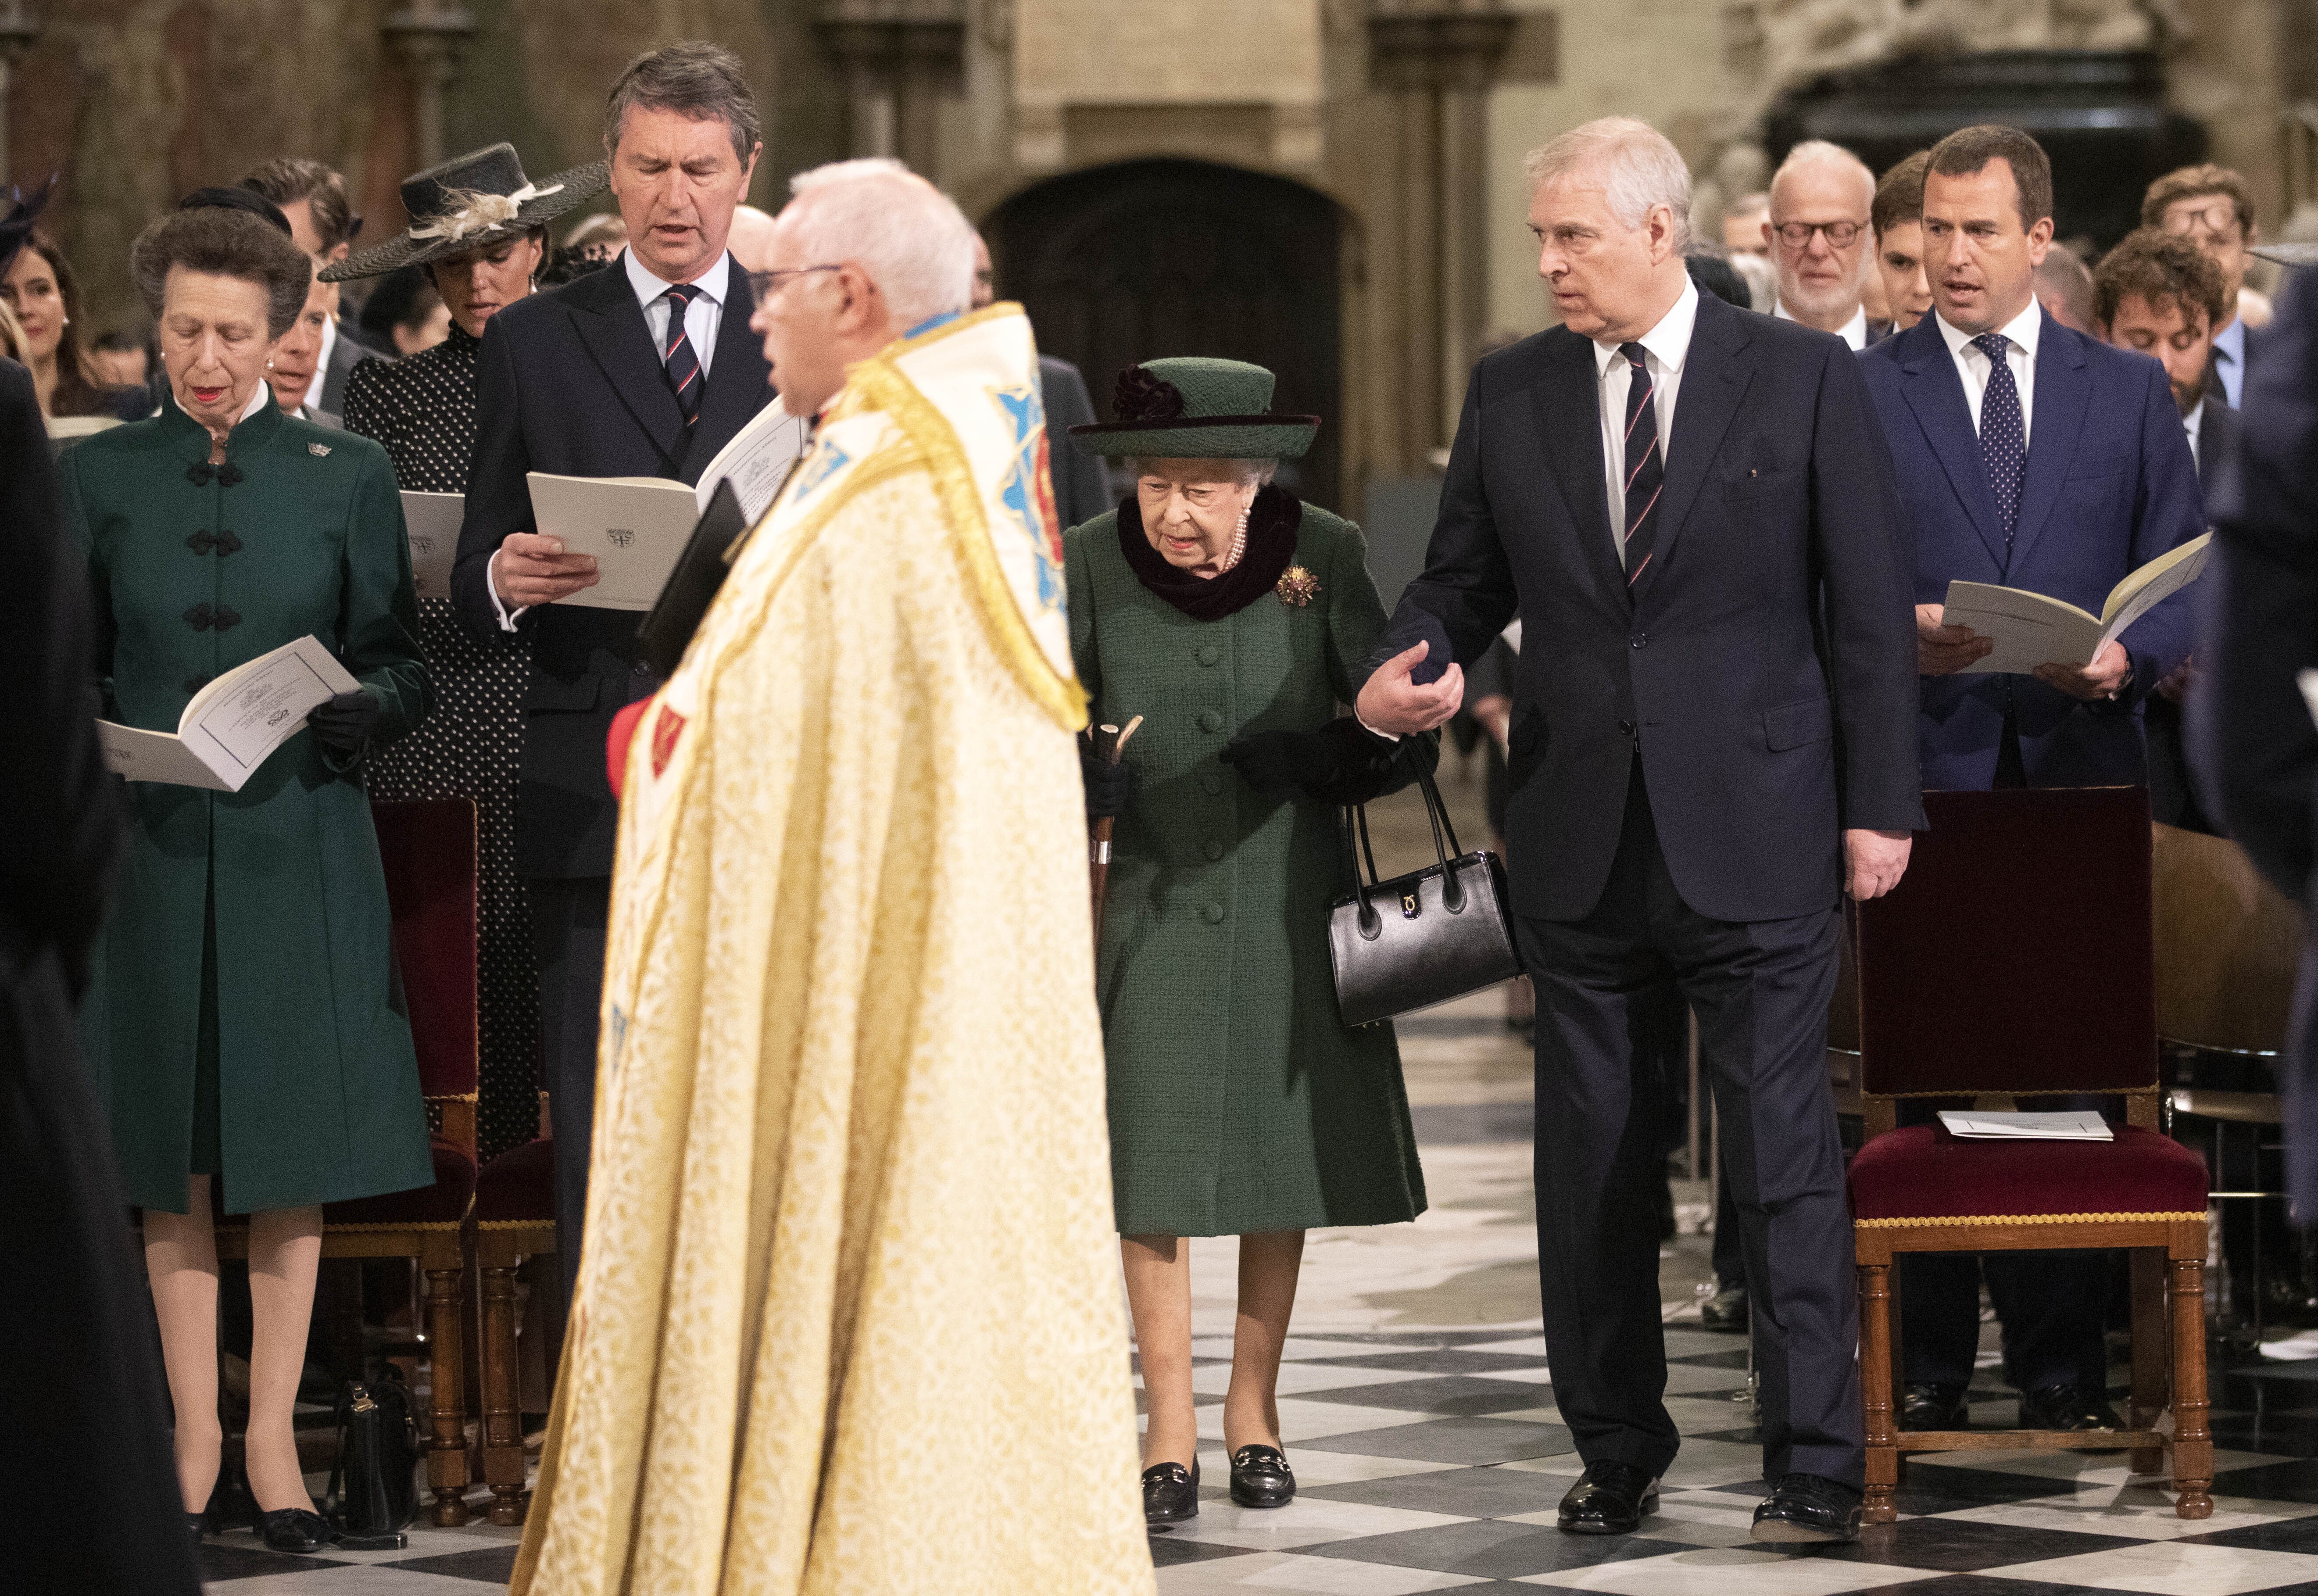 Queen Elizabeth II and the Duke of York arrive at a Service of Thanksgiving for the life of the Duke of Edinburgh, at Westminster Abbey in London (PA)